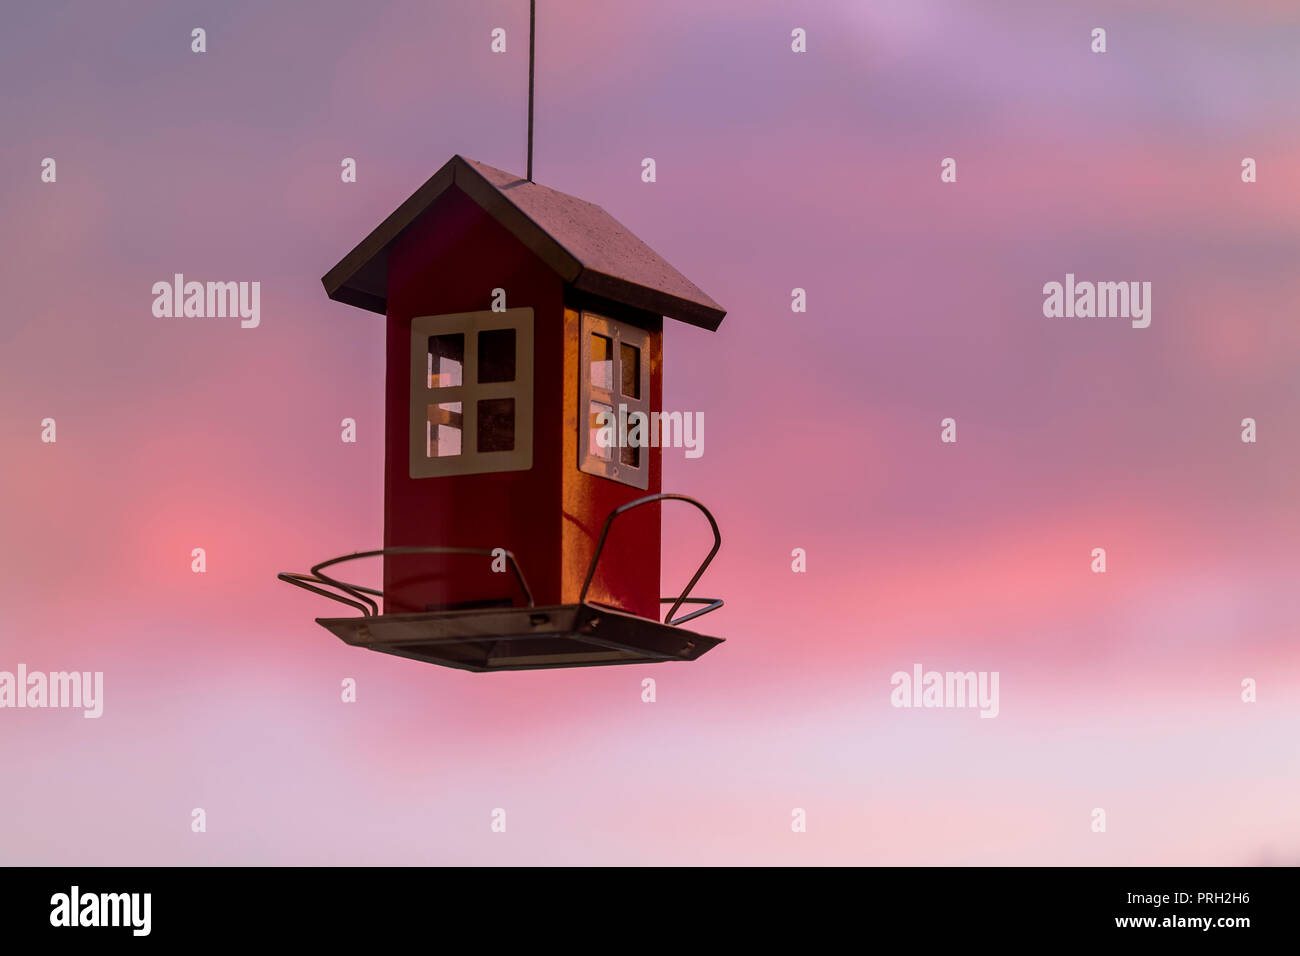 Small red typical Swedish or Scandinavian wood house looking bird house against beautiful pink sunrise sky Stock Photo